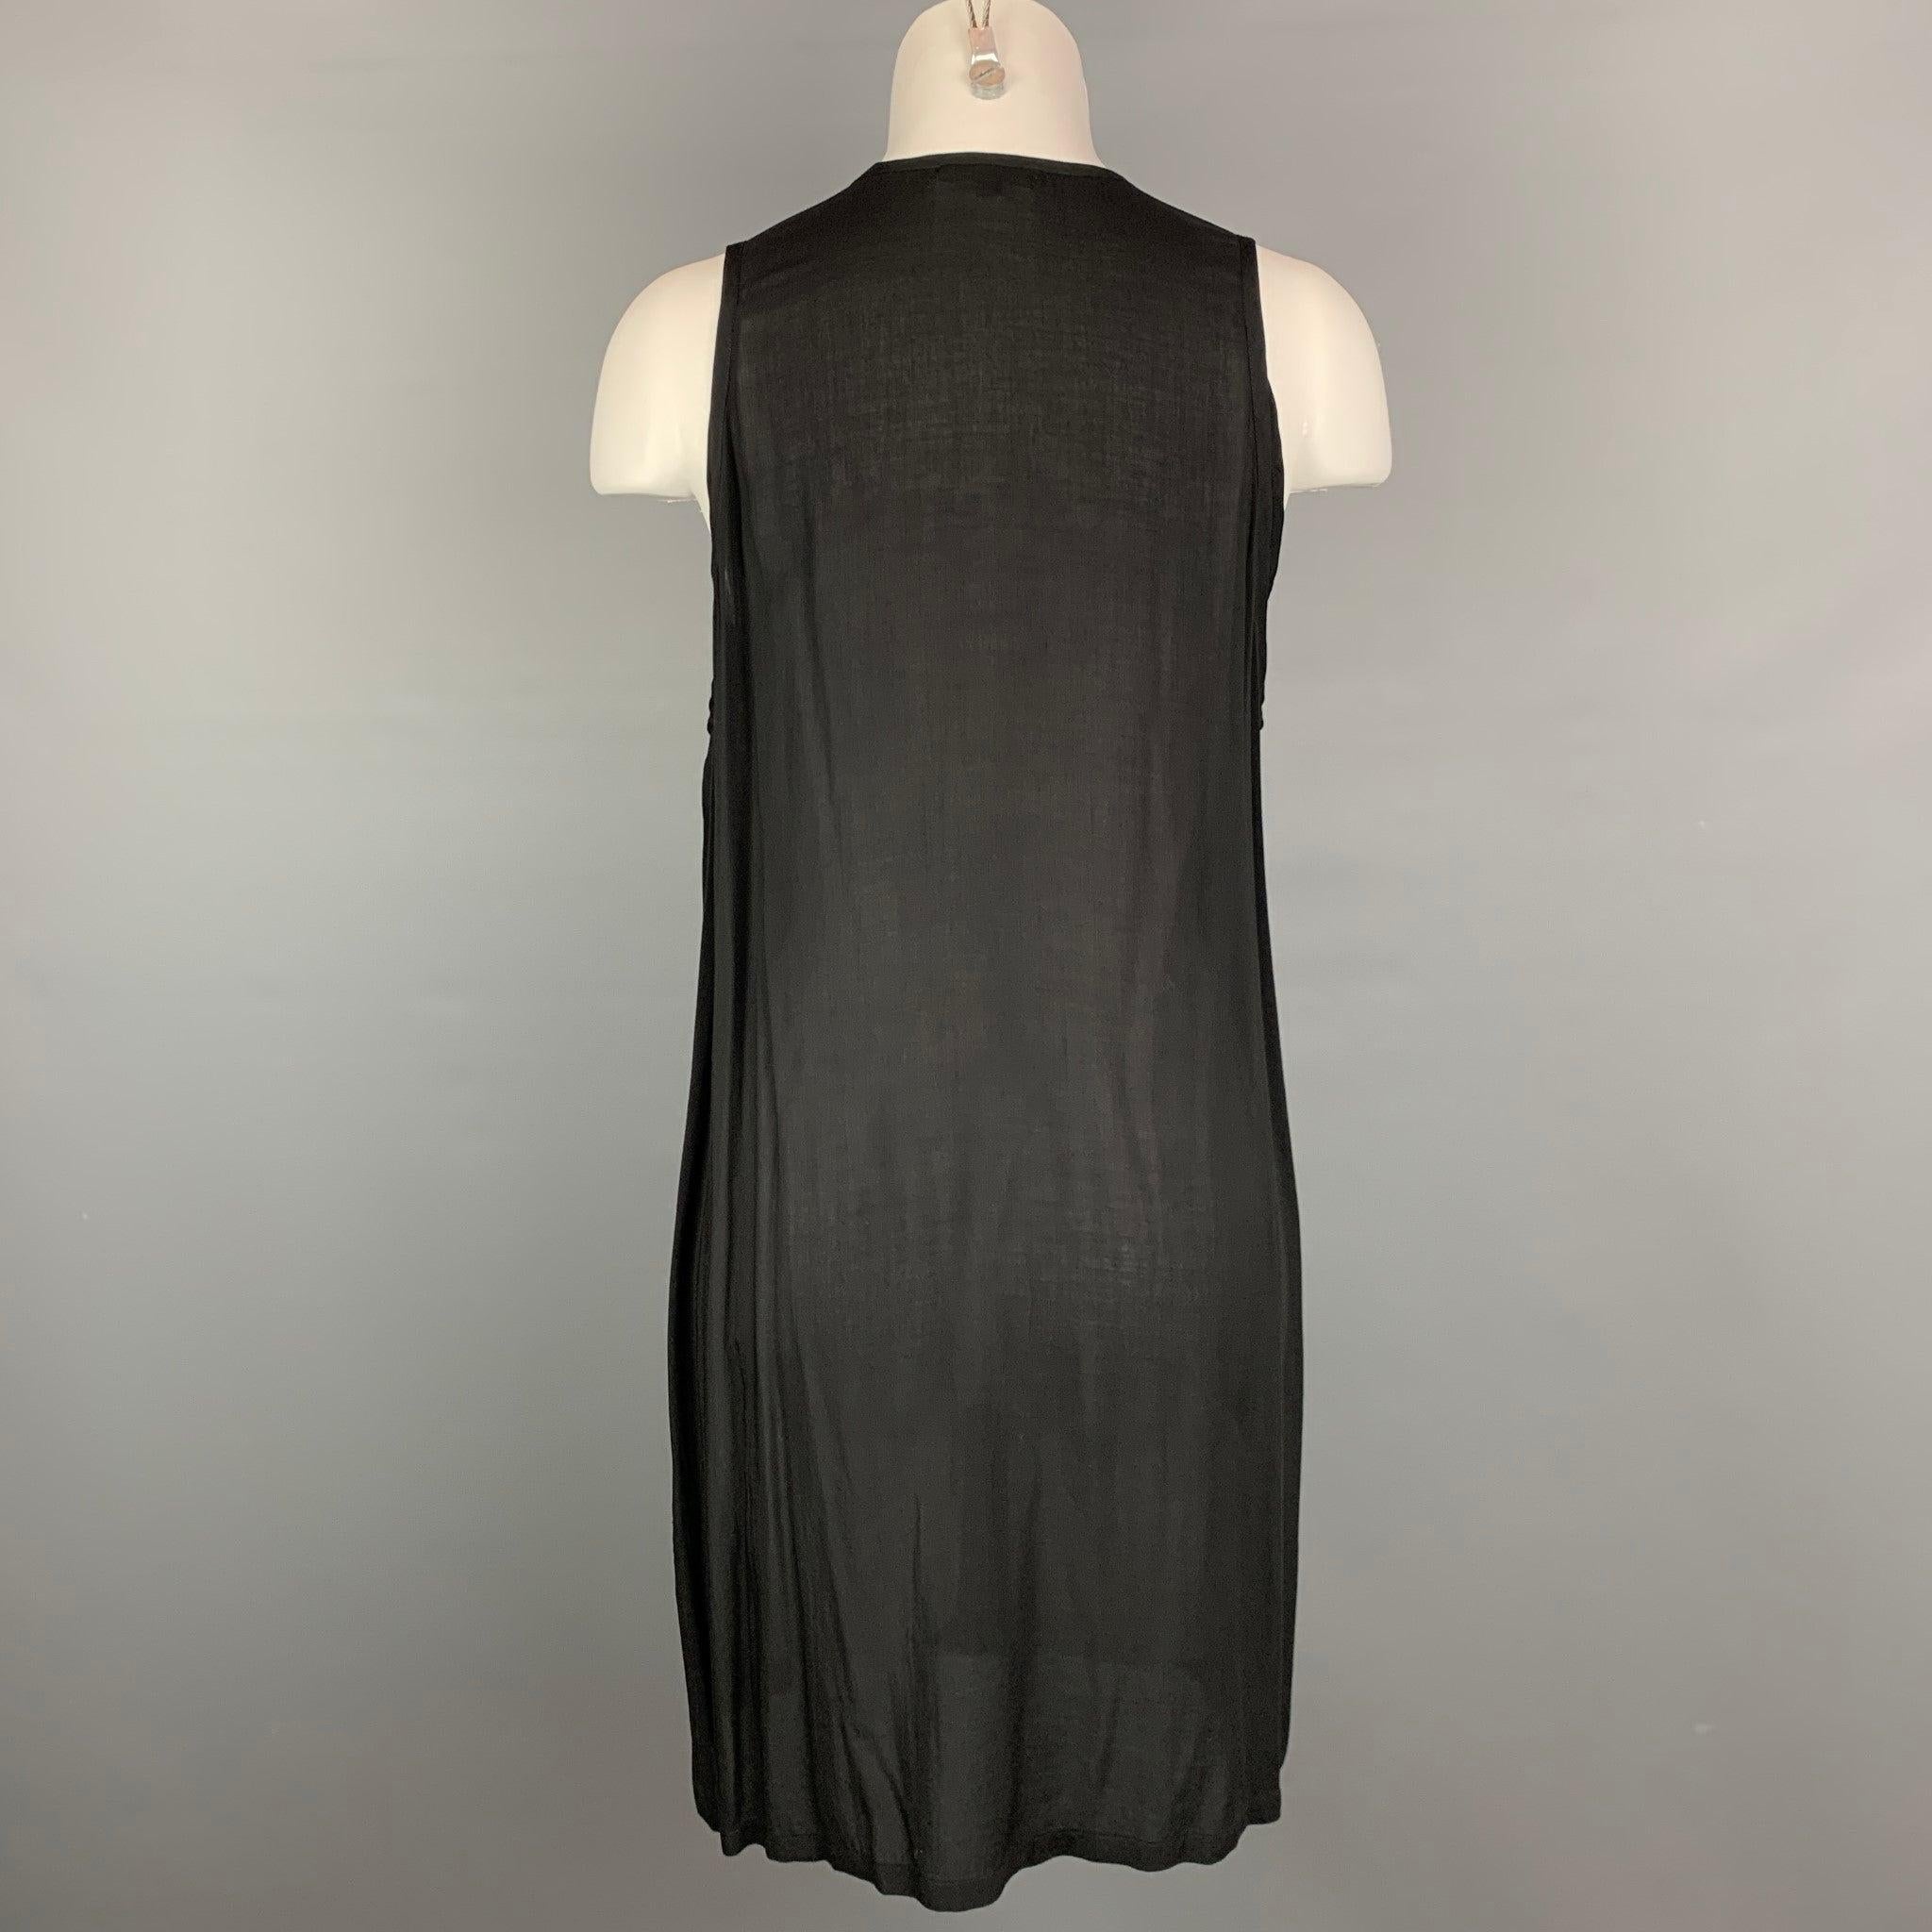 ANN DEMEULEMEESTER Size 6 Black Ruffled Shift Dress In Good Condition For Sale In San Francisco, CA